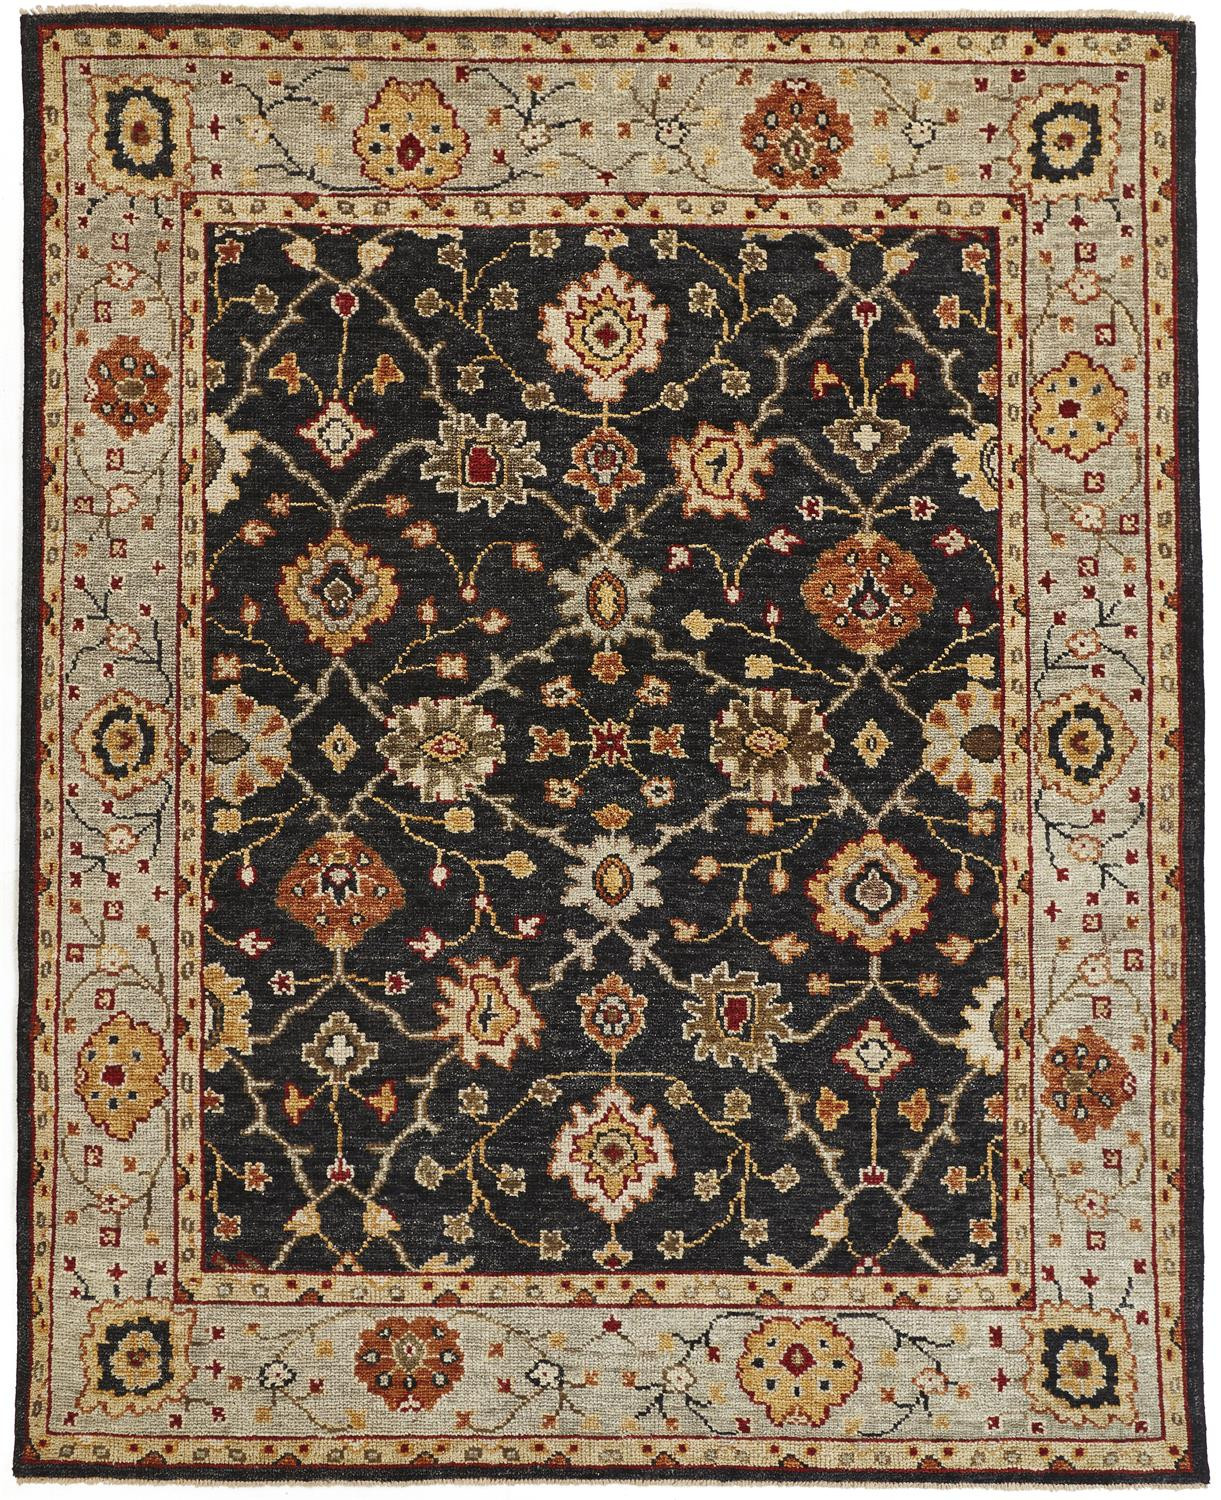 12' X 15' Black Gold And Gray Wool Floral Hand Knotted Stain Resistant Area Rug With Fringe-512602-1